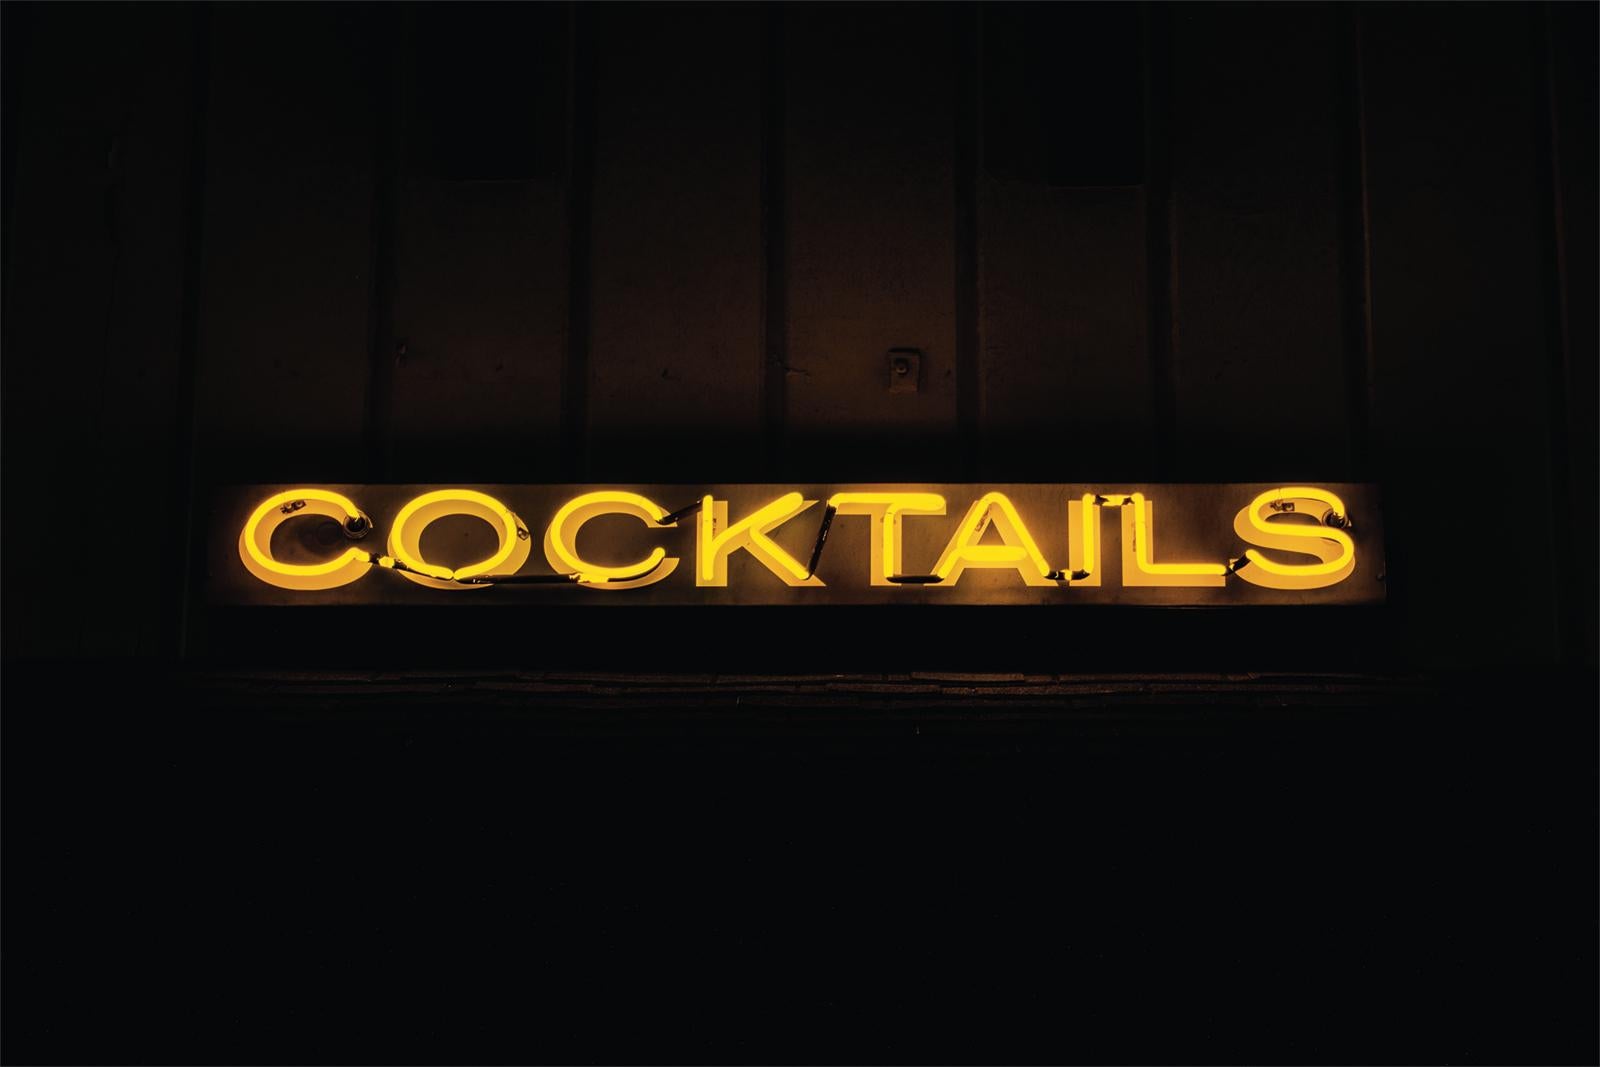 "Cocktails" Photography 30" x 40" inch Edition of 5 by Oleg Char